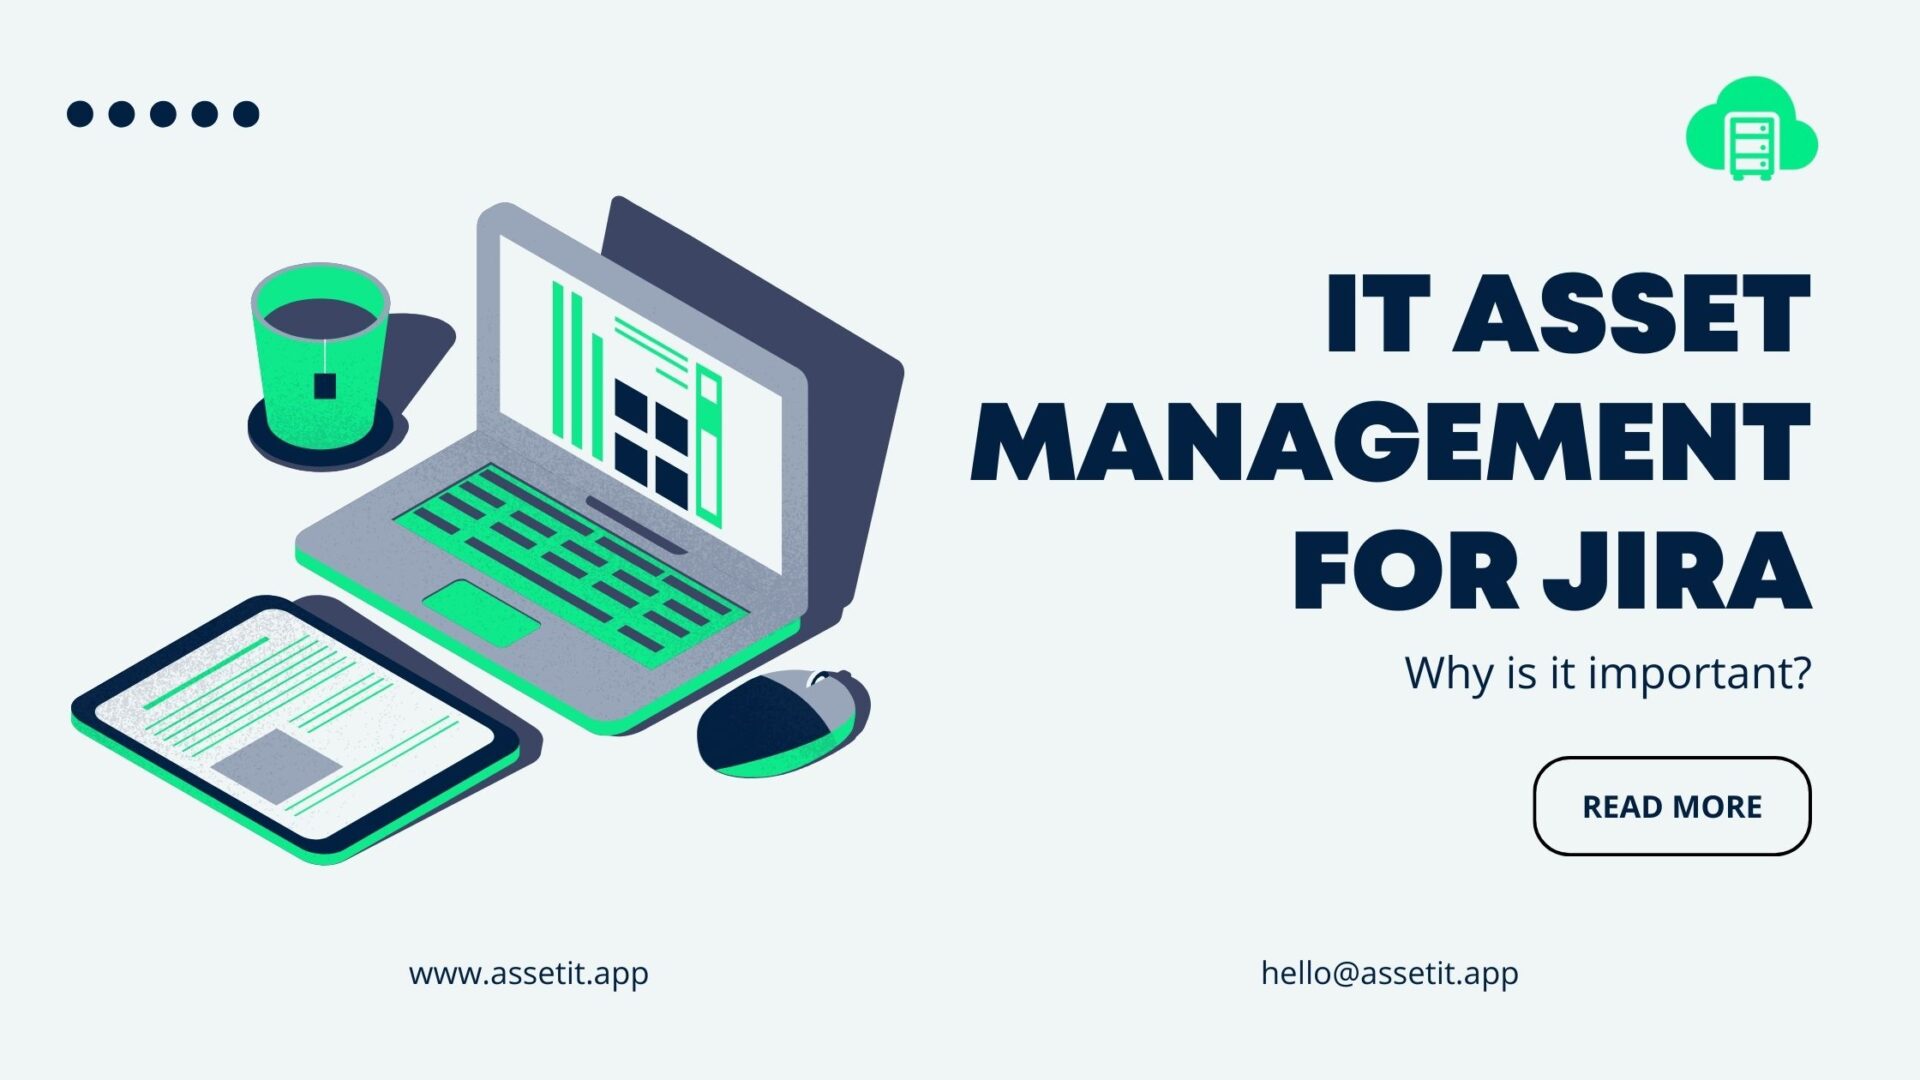 WHY IS IT ASSET MANAGEMENT FOR JIRA SO IMPORTANT